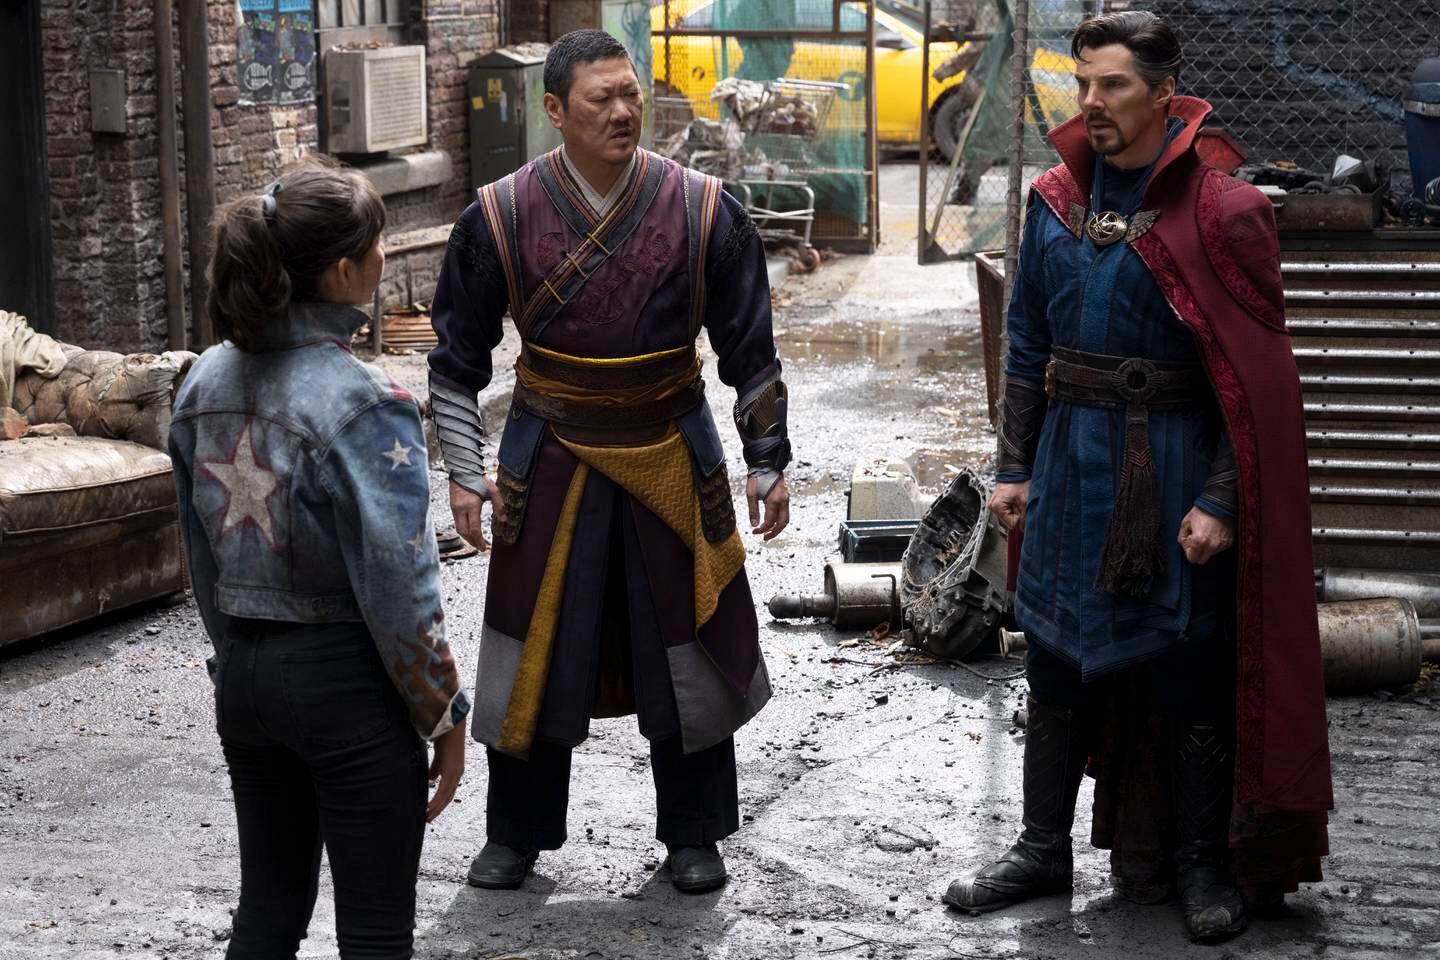 Xochitl Gomez as America Chavez, Benedict Wong as Wong and Benedict Cumberbatch as Doctor Strange/Stephen Strange in 'Doctor Strange in the Multiverse of Madness'. Photo: Marvel Studios